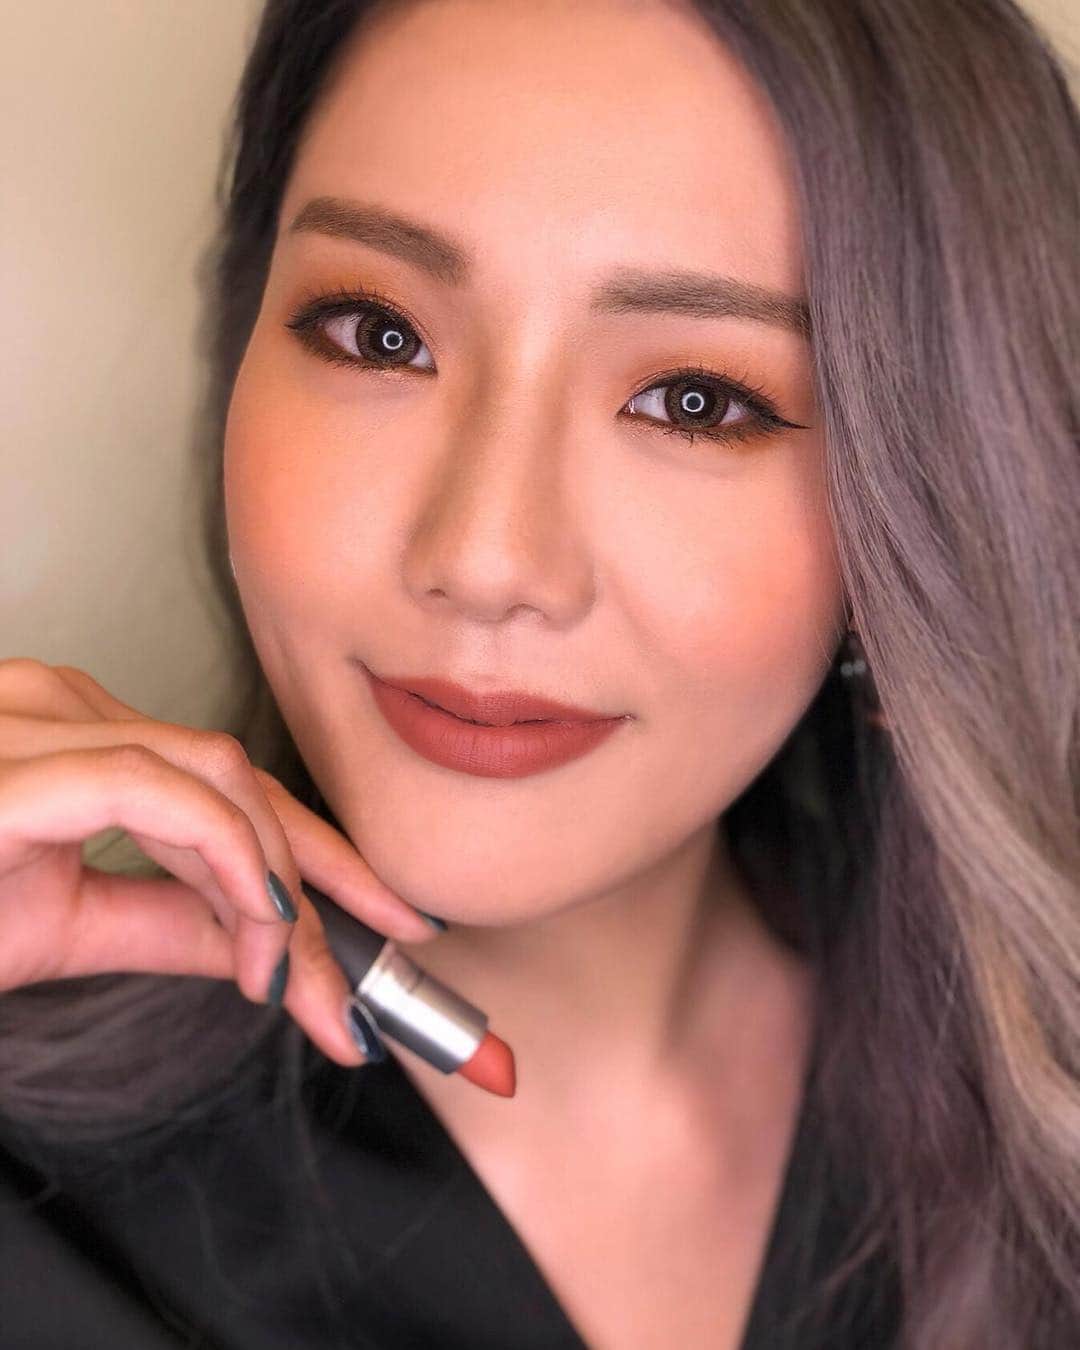 M·A·C Cosmetics Hong Kongさんのインスタグラム写真 - (M·A·C Cosmetics Hong KongInstagram)「🔥大熱杏仁奶茶色#絲霧唇膏 ！一抹氣質直線上升！ 令奶茶控一秒瘋狂嘅M·A·C唇膏除咗Liptensity #SmokedAlmond 之外，仲有佢嘅最強接班人 —— #絲霧唇膏 #SultryMove！超溫柔杏仁奶茶色配上最柔滑嘅絲霧質感，令你氣質秒速level up！ Product mentioned: #MACPowderKiss Lipstick in #SultryMove - HK$160 #MACArtLibrary Pro Palette in #FlameBoyant - HK$520 #MACMineralizeBlush in #SweetEnough - HK$240 #絲霧唇膏 #輕吻絲霧唇 #MACHongKong Regram: @yammimac  Inspired by the hottest Liptensity Lipstick in #SmokedAlmond, here is the next perfect warm pink-brown shade that will surely win your heart! LEVEL UP your natural elegance with the new #PowderKiss Lipstick in #SultryMove !」4月14日 10時59分 - maccosmeticshk